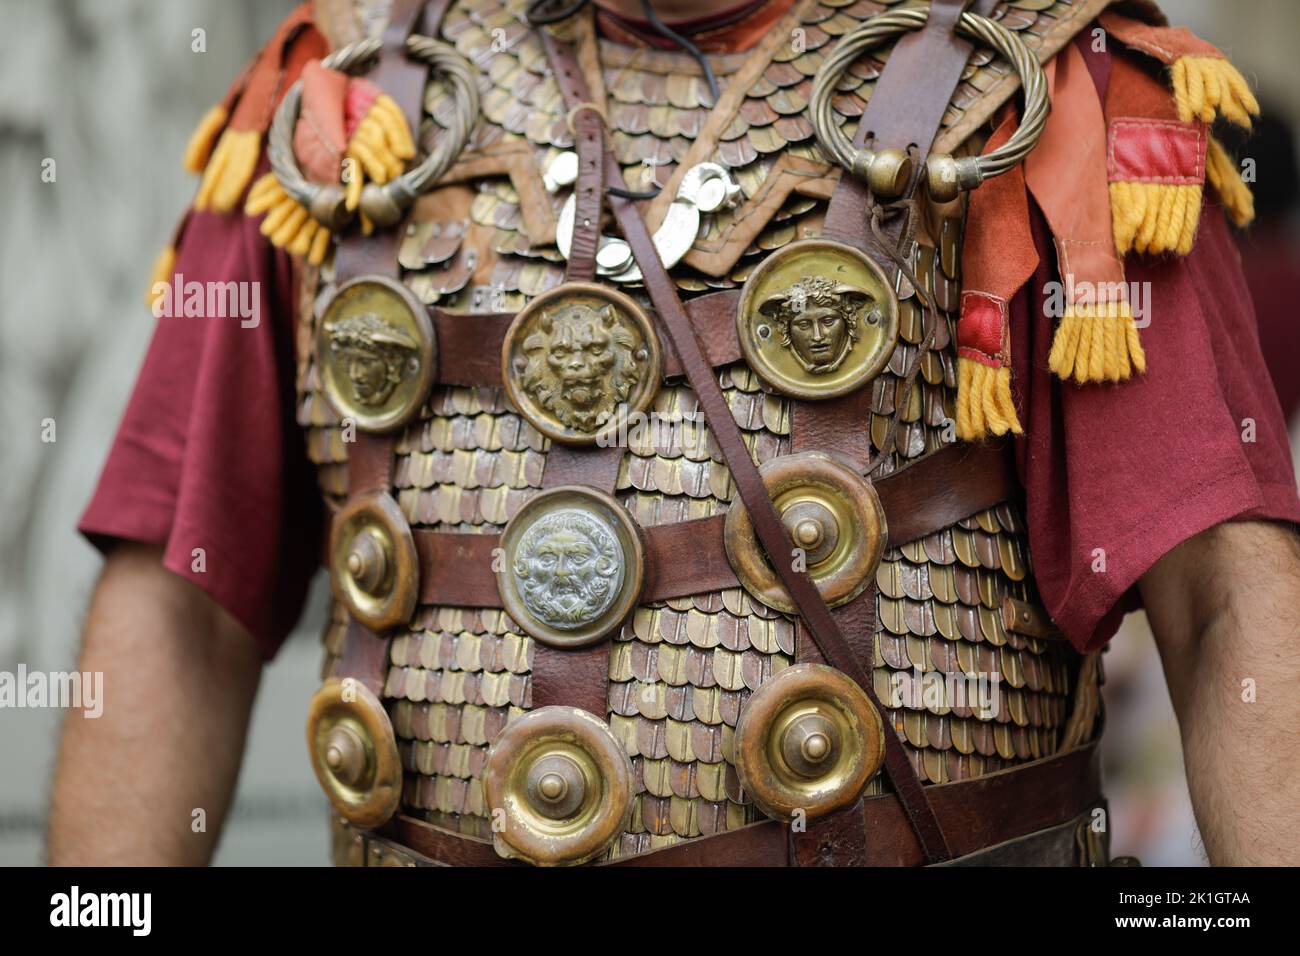 Bucharest, Romania - September 17, 2022: Details with the armor and clothing of an Ancient Roman general during a historic reenactment event. Stock Photo